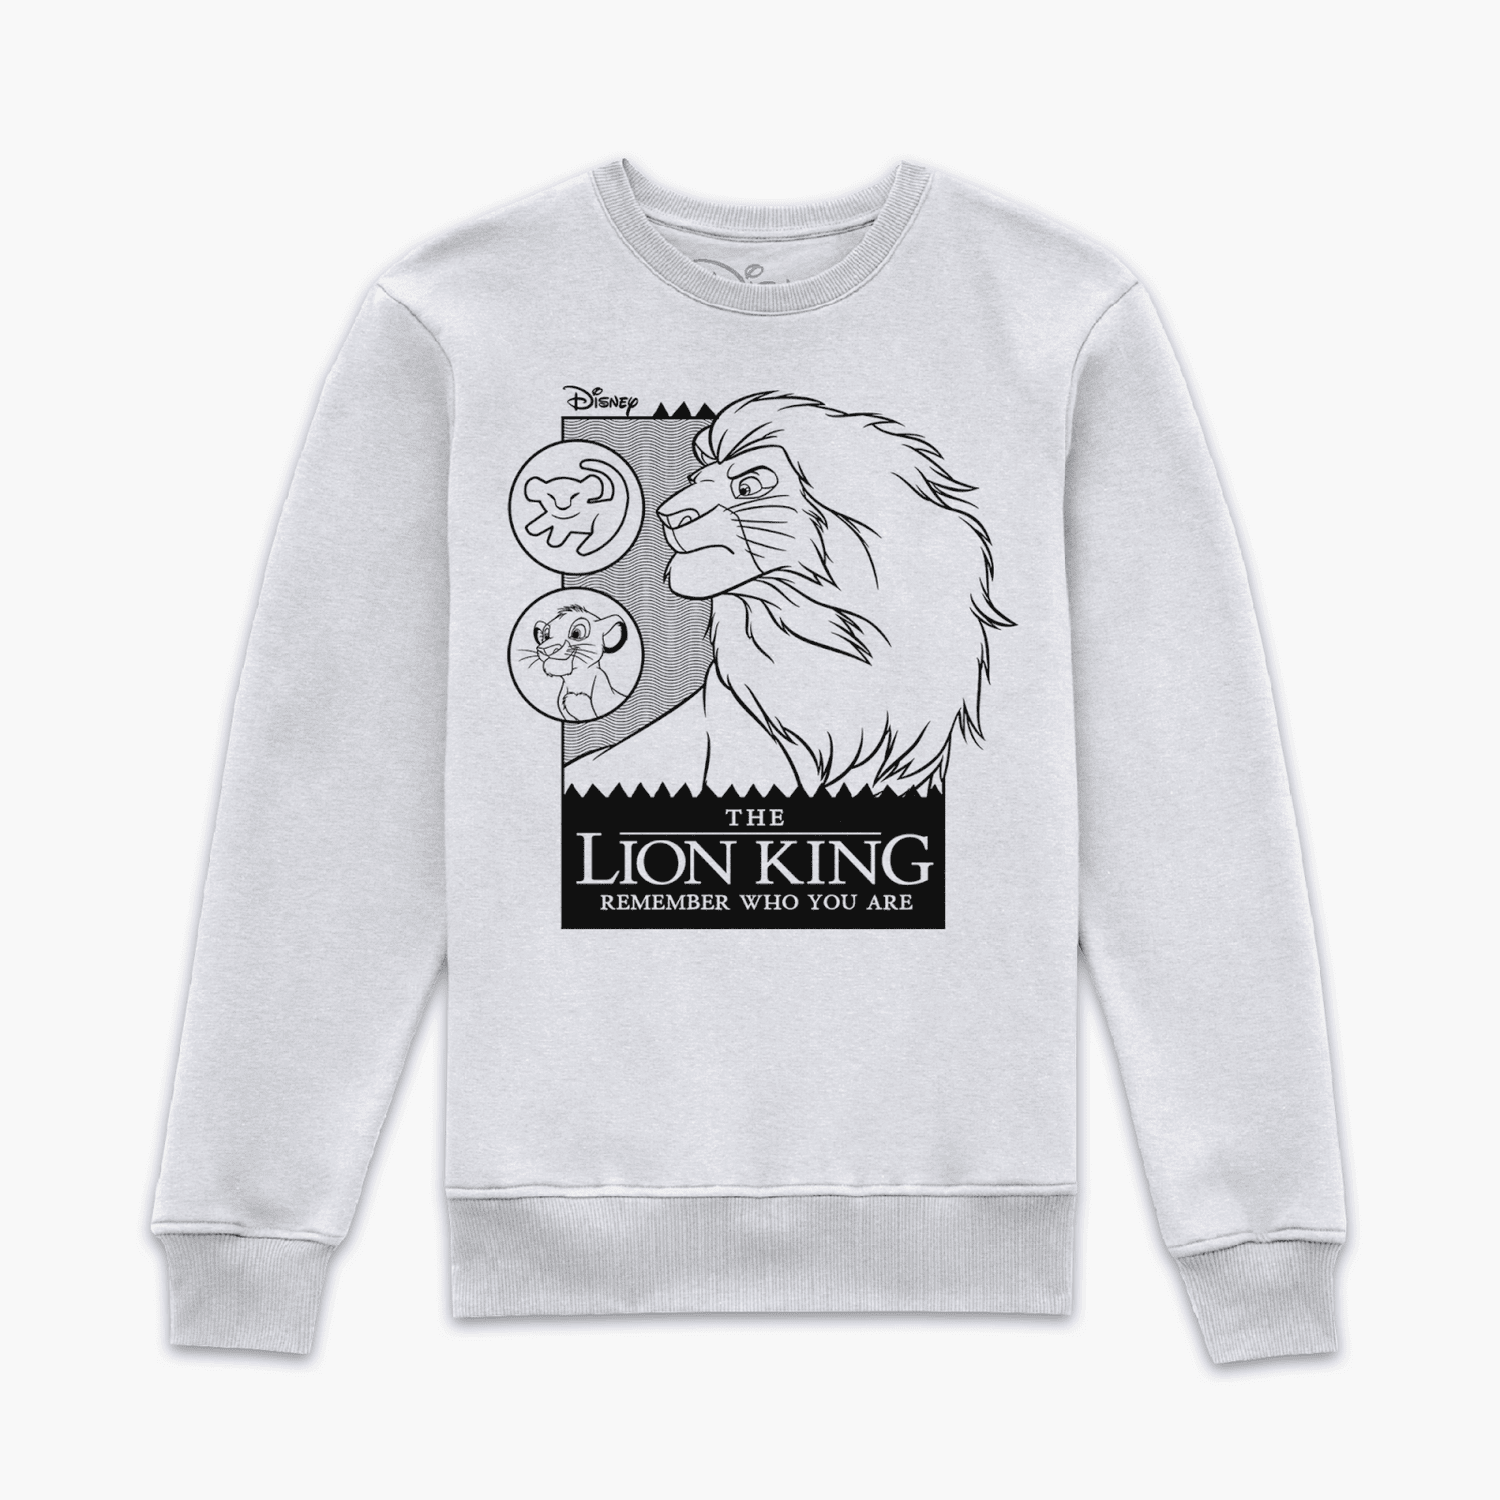 Le Roi Lion Remember Who You Are Sweatshirt - Blanc